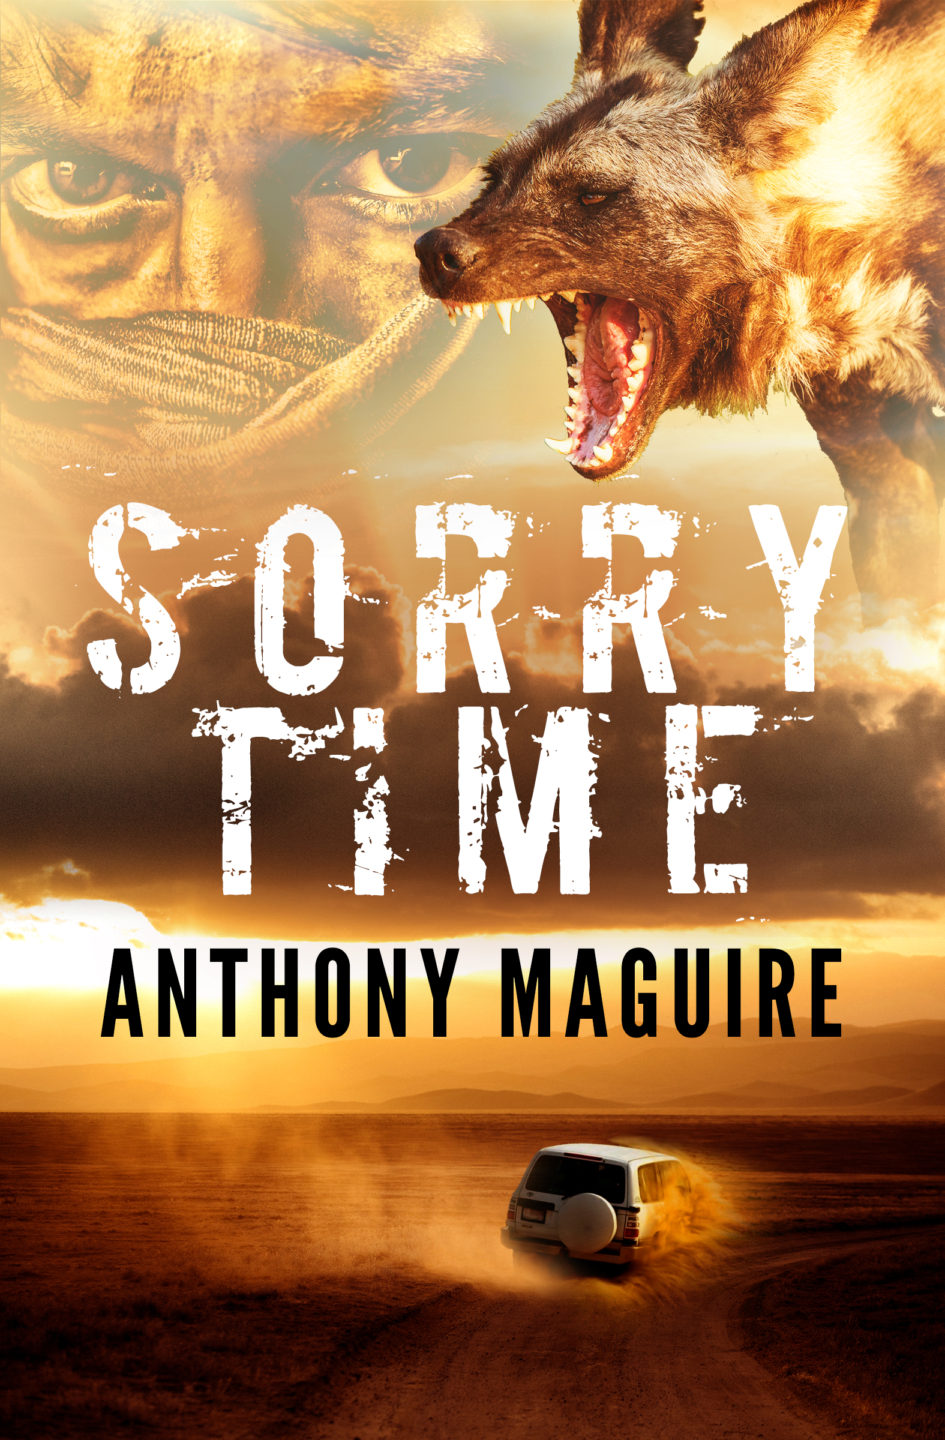 SorryTime Anthony Maguire